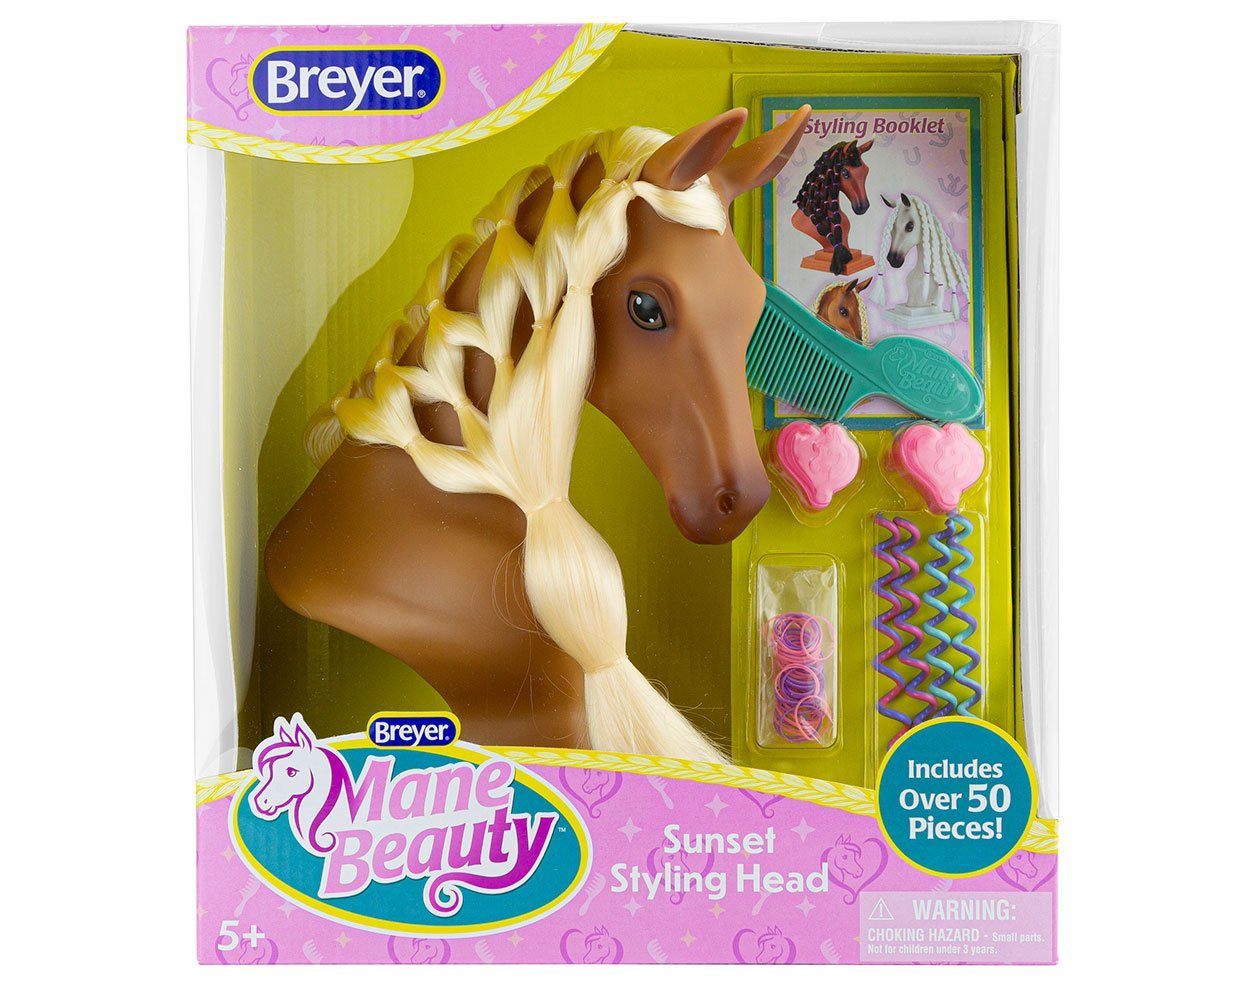 Breyer light brown horse head with a long blond mane so that kids can brush and braid.  Displayed in box along with accessories styling tools